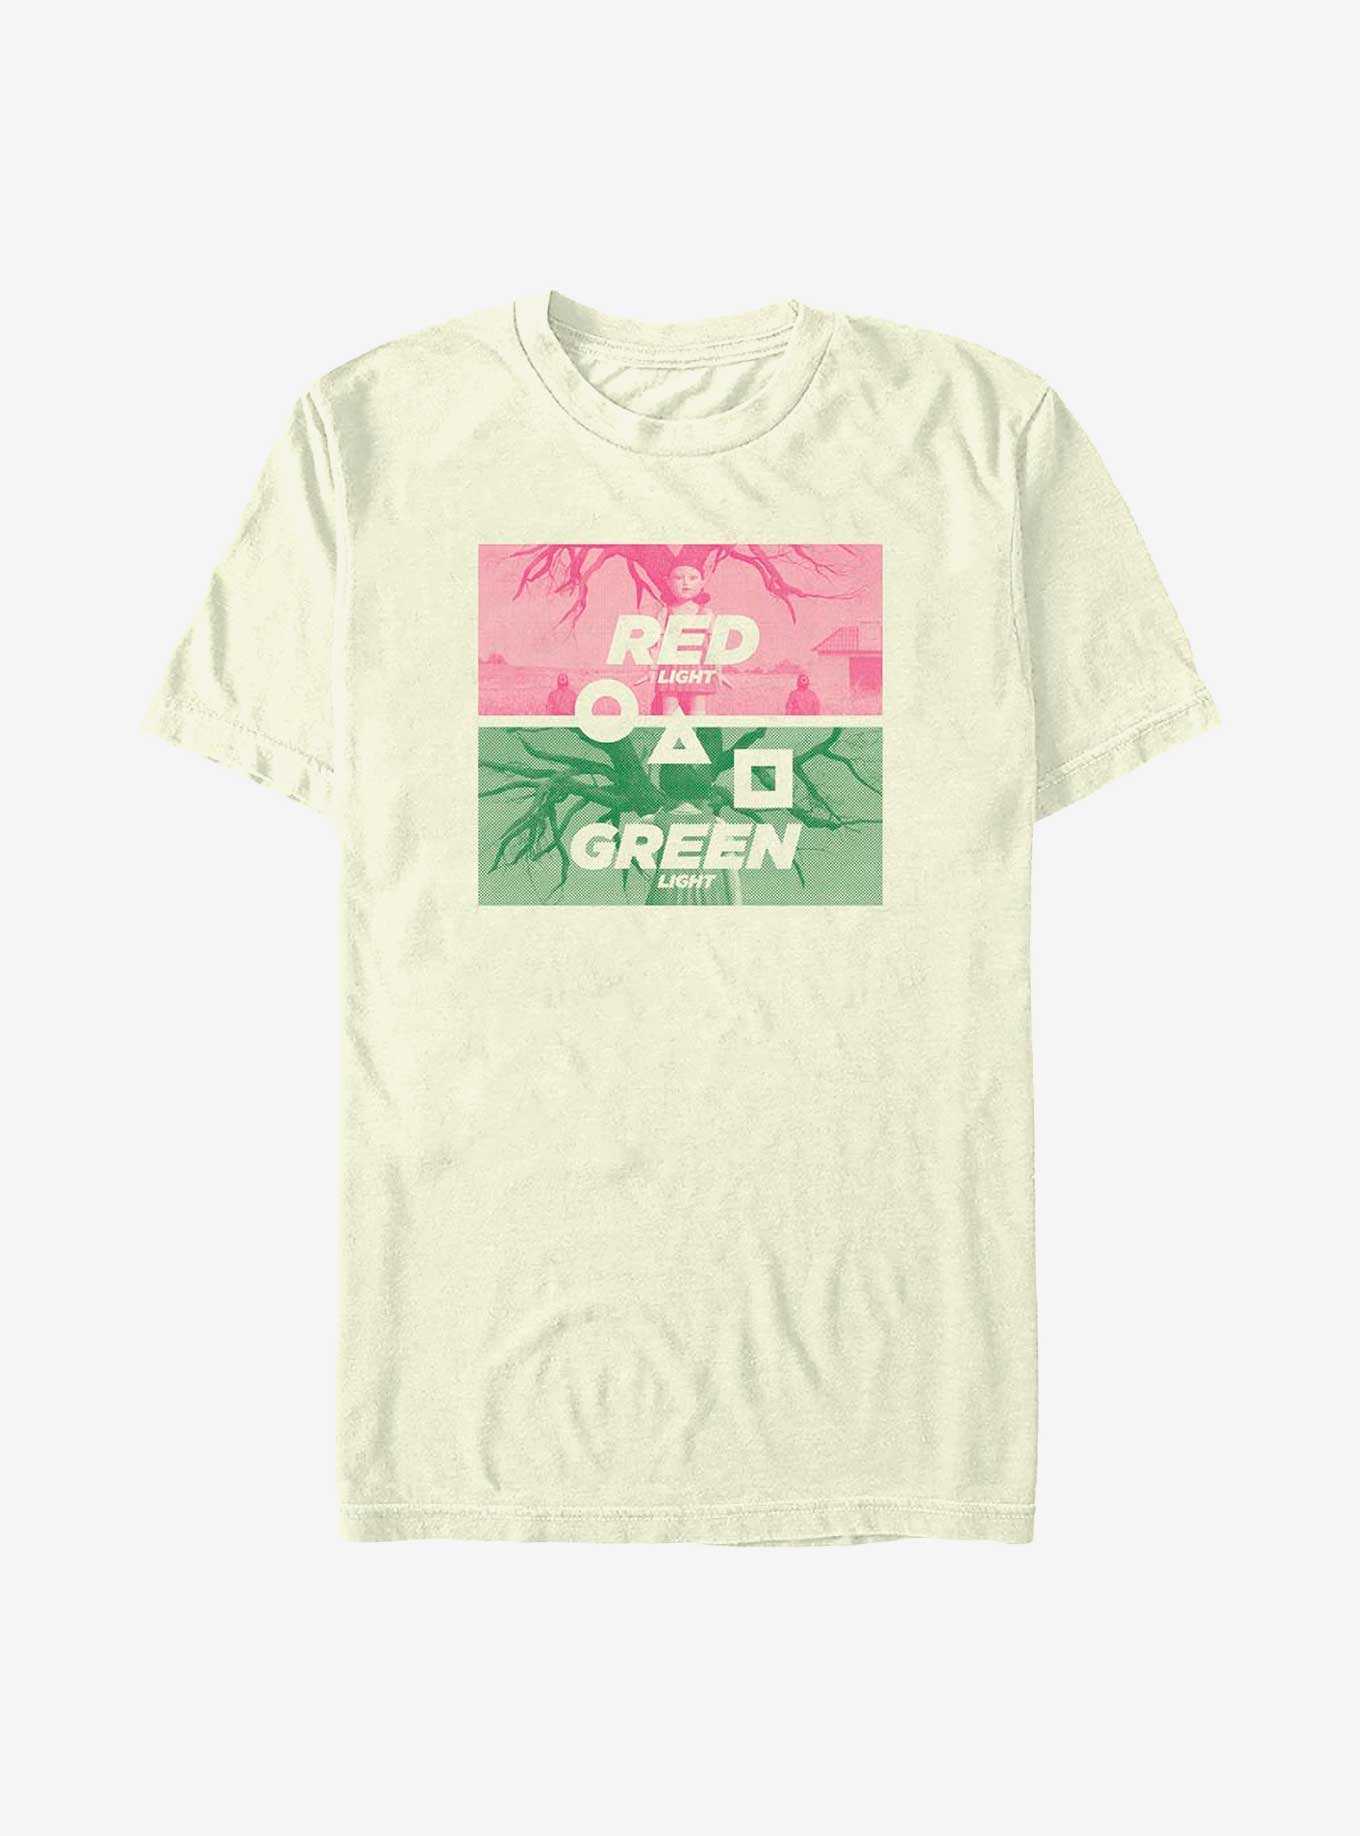 Squid Game First Game Red Light Green Light T-Shirt, , hi-res